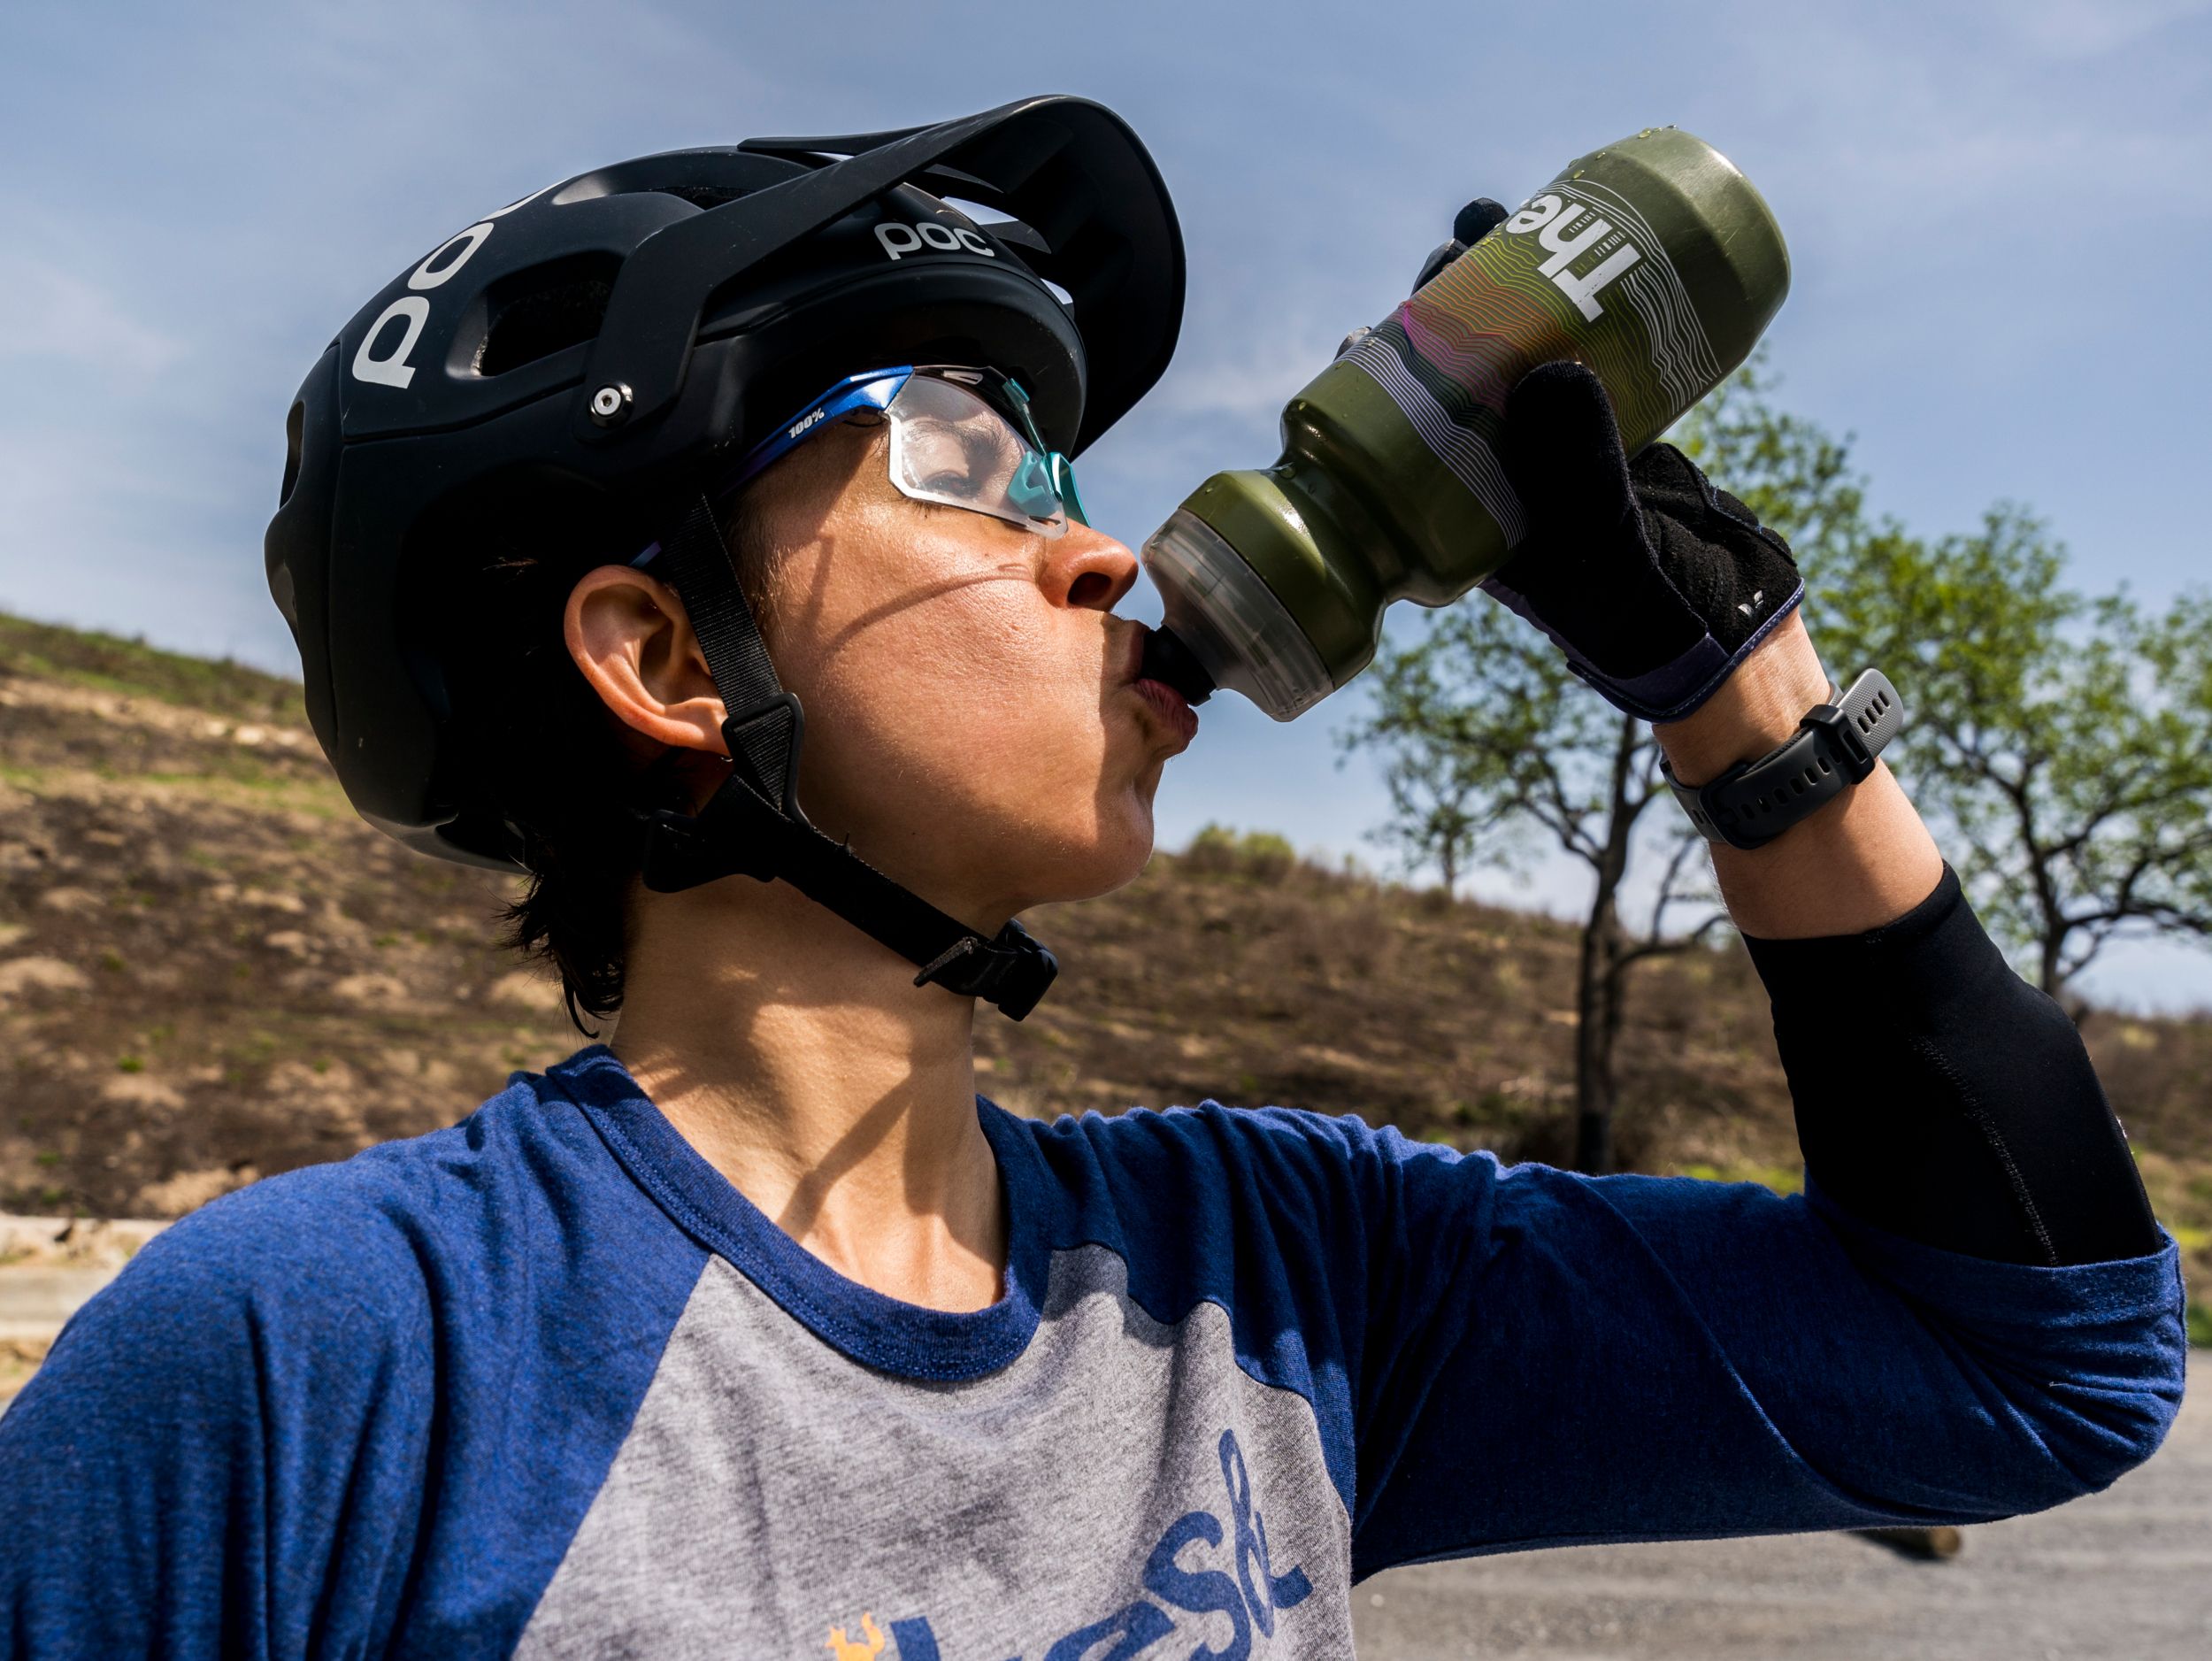 Hydration for staying hydrated during cycling